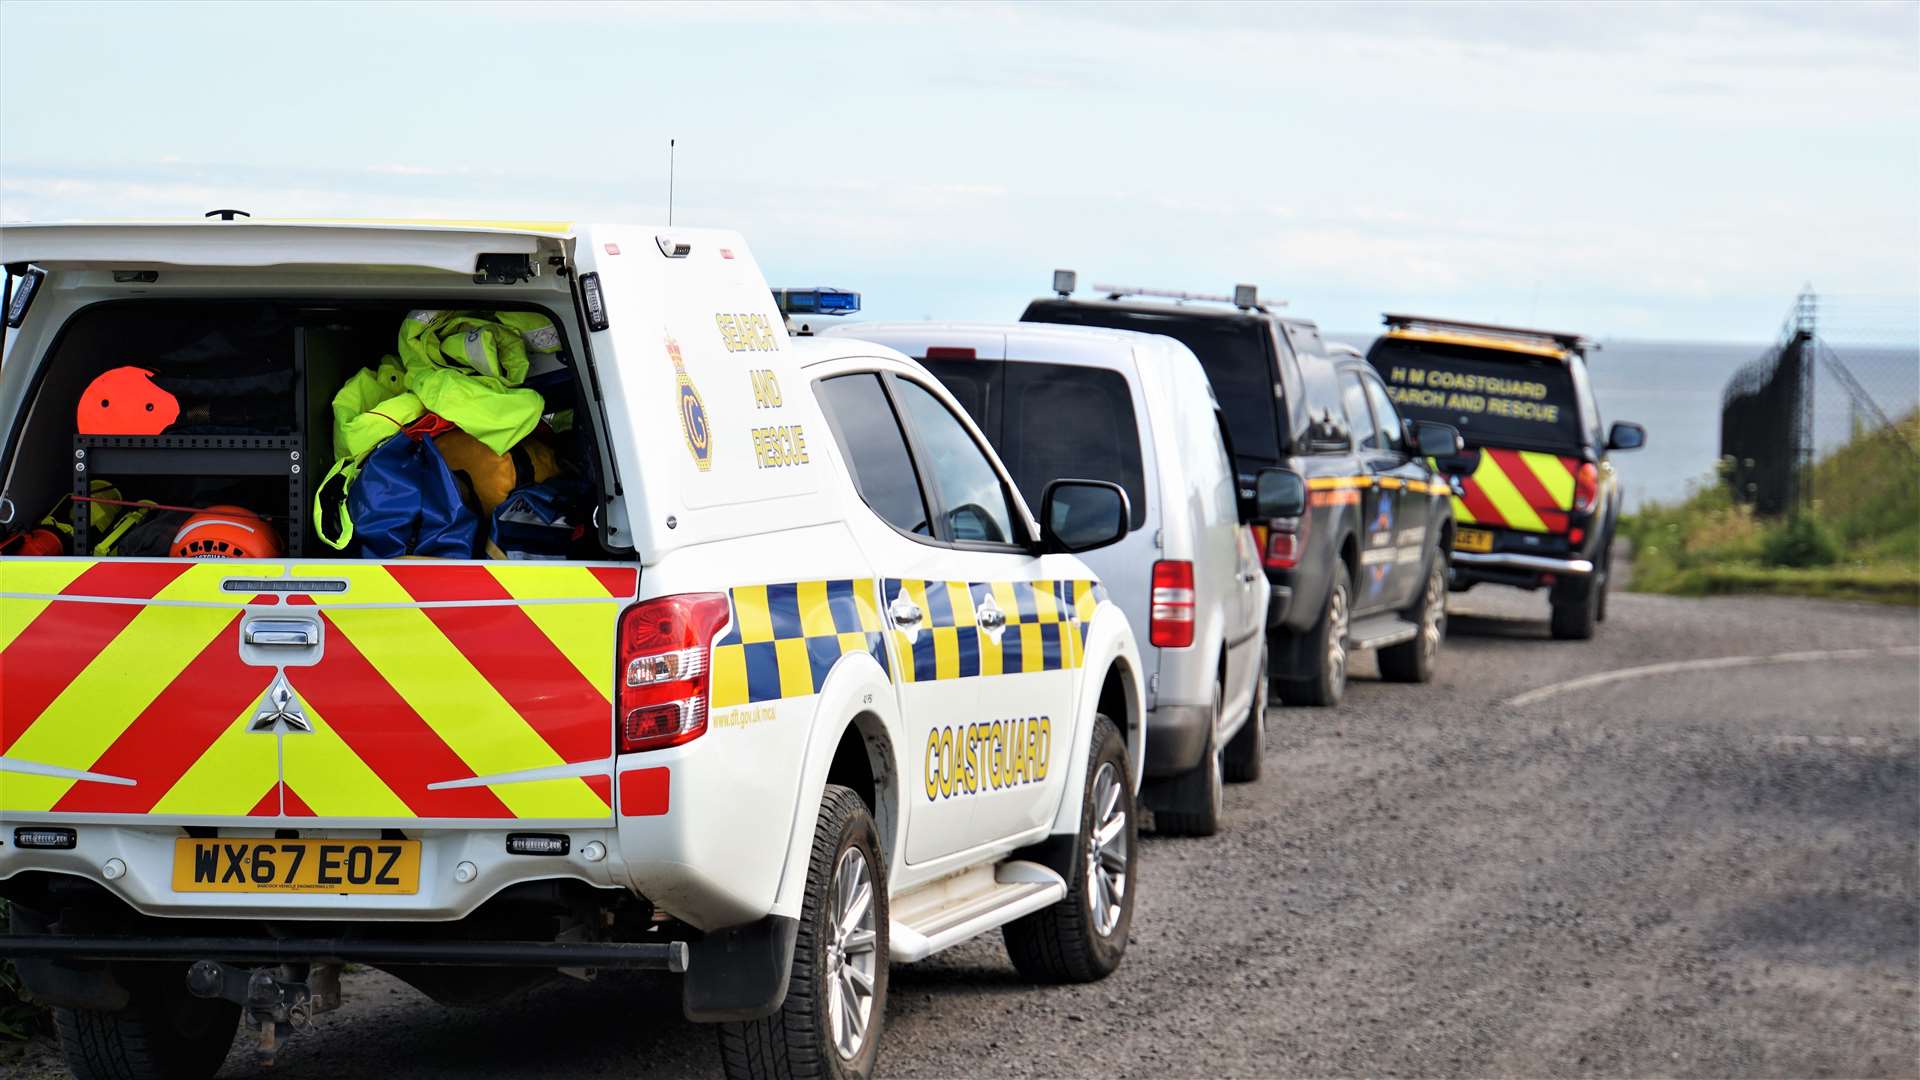 Coastguard vehicles attend an incident near Wick. Picture: DGS